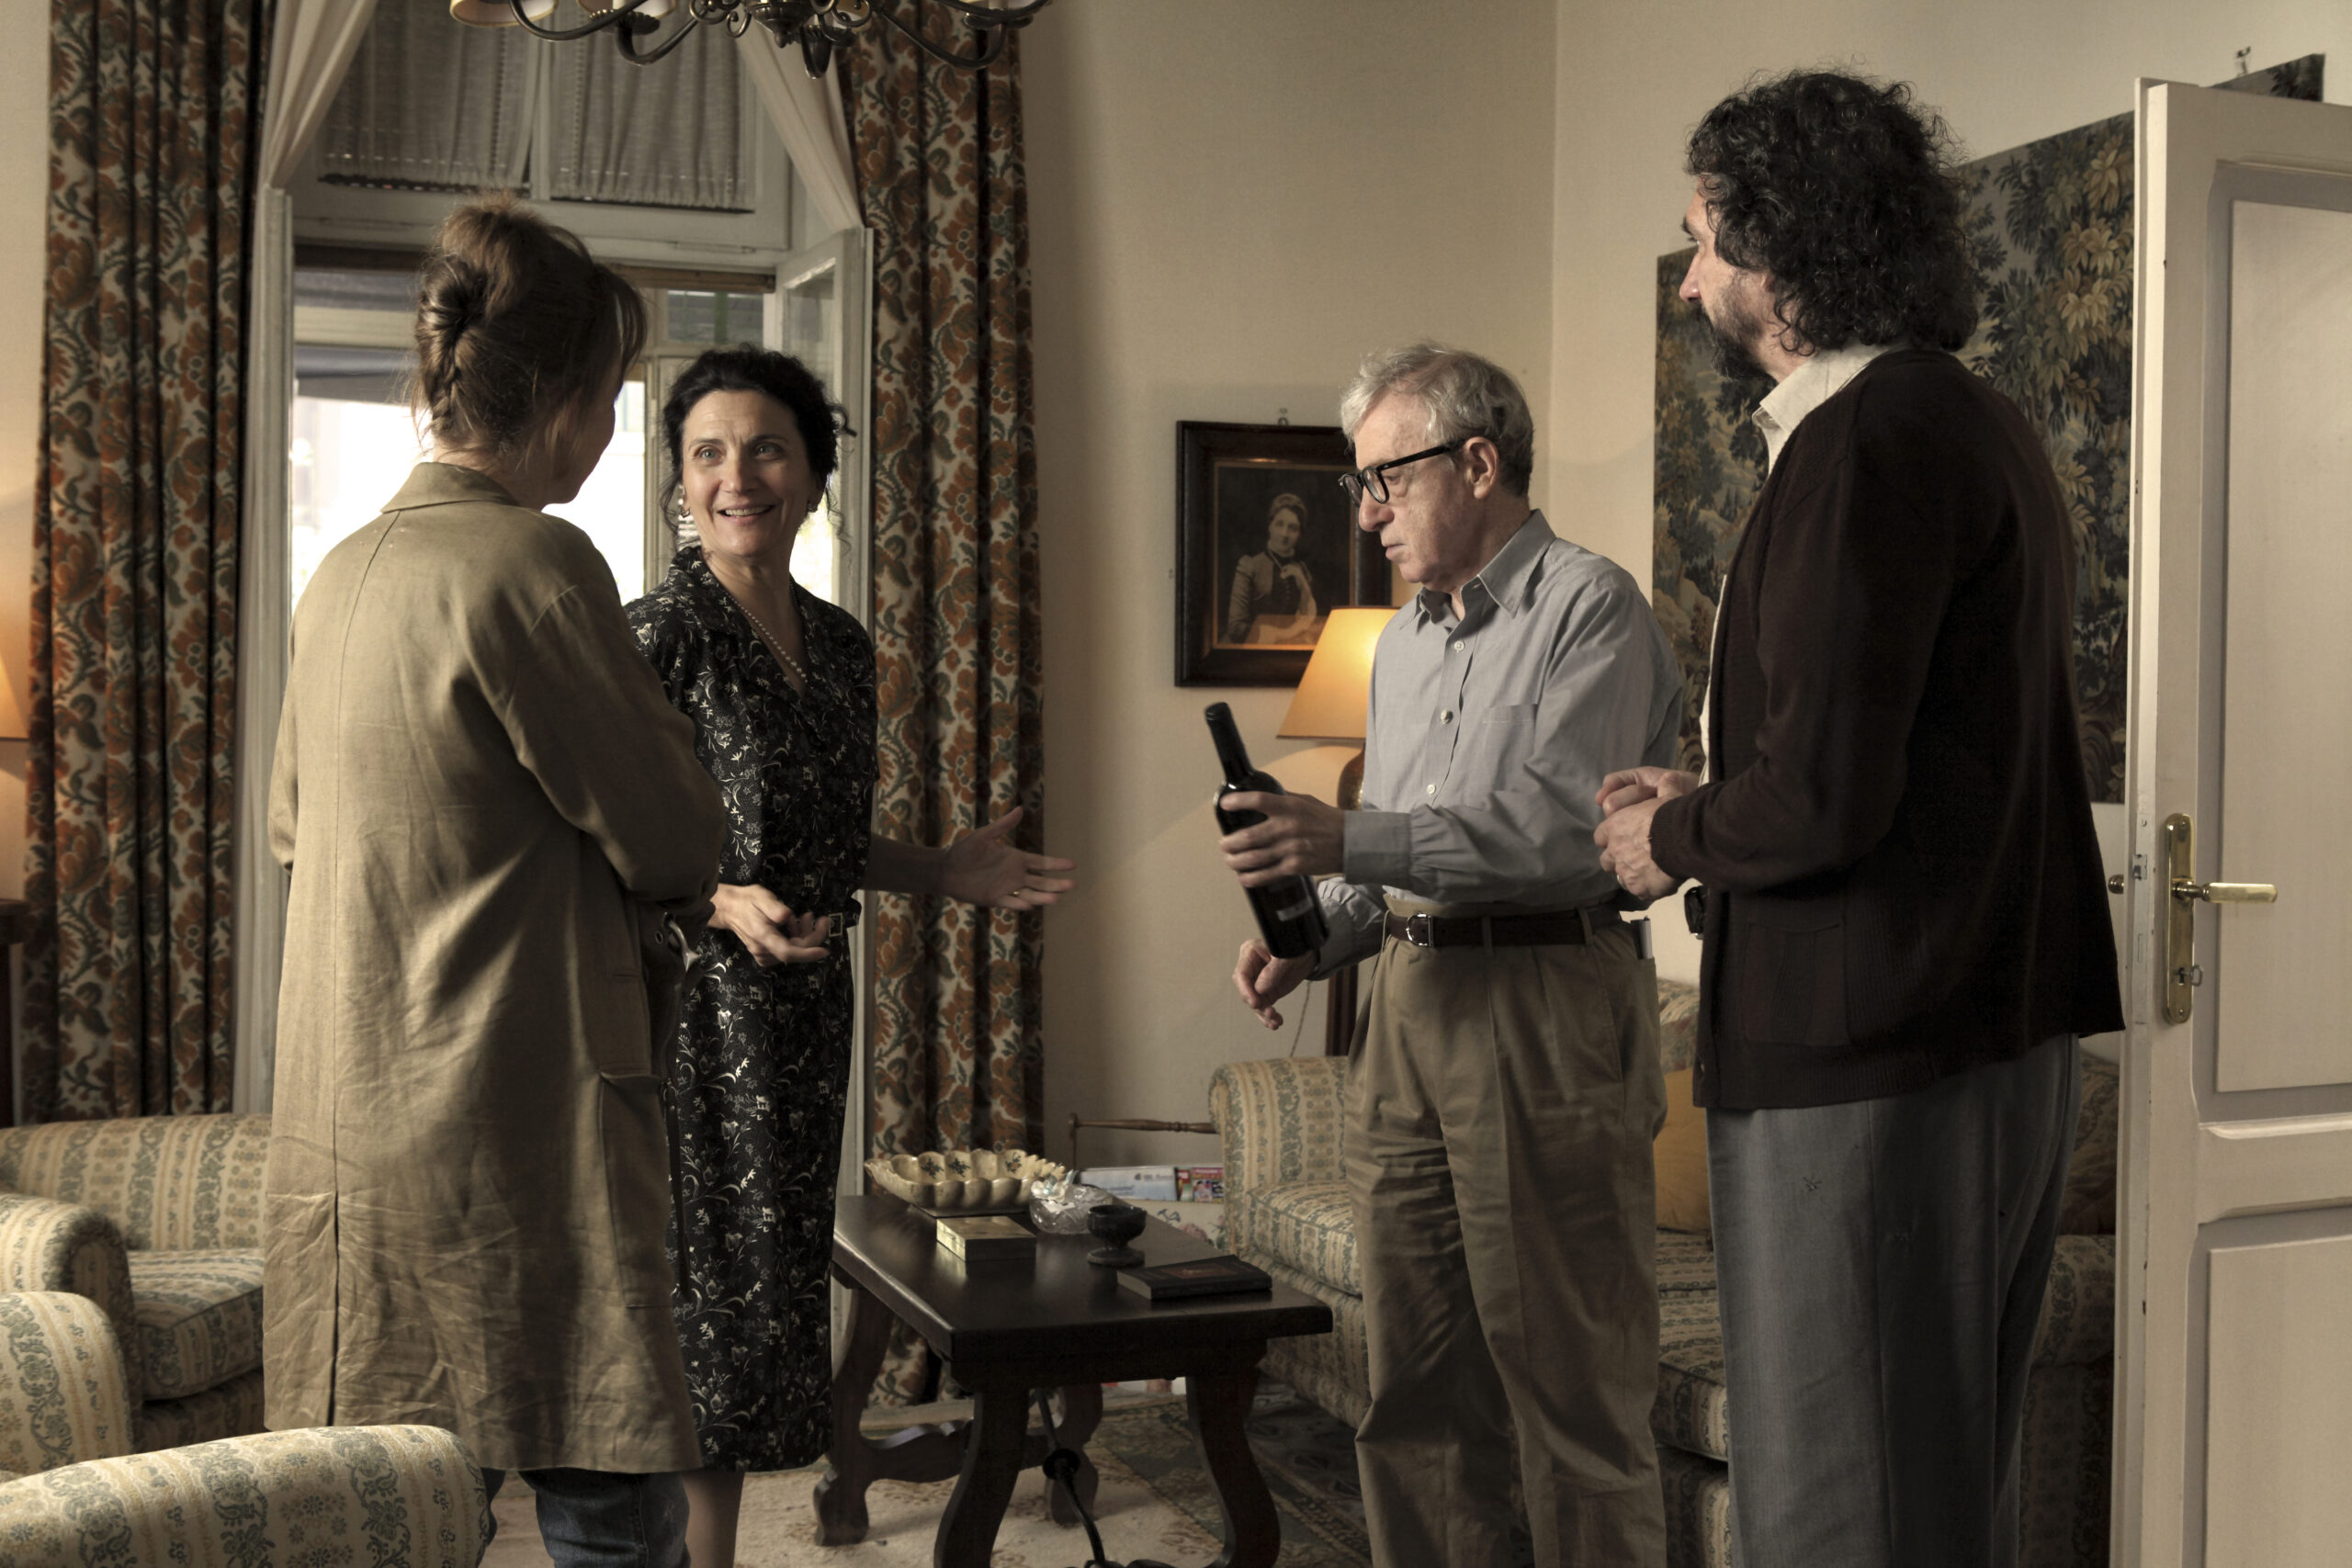 TO ROME WITH LOVE - Directed by Woody Allen - Int. Giancarlo’s Home - ©2012 - Sony Pictures